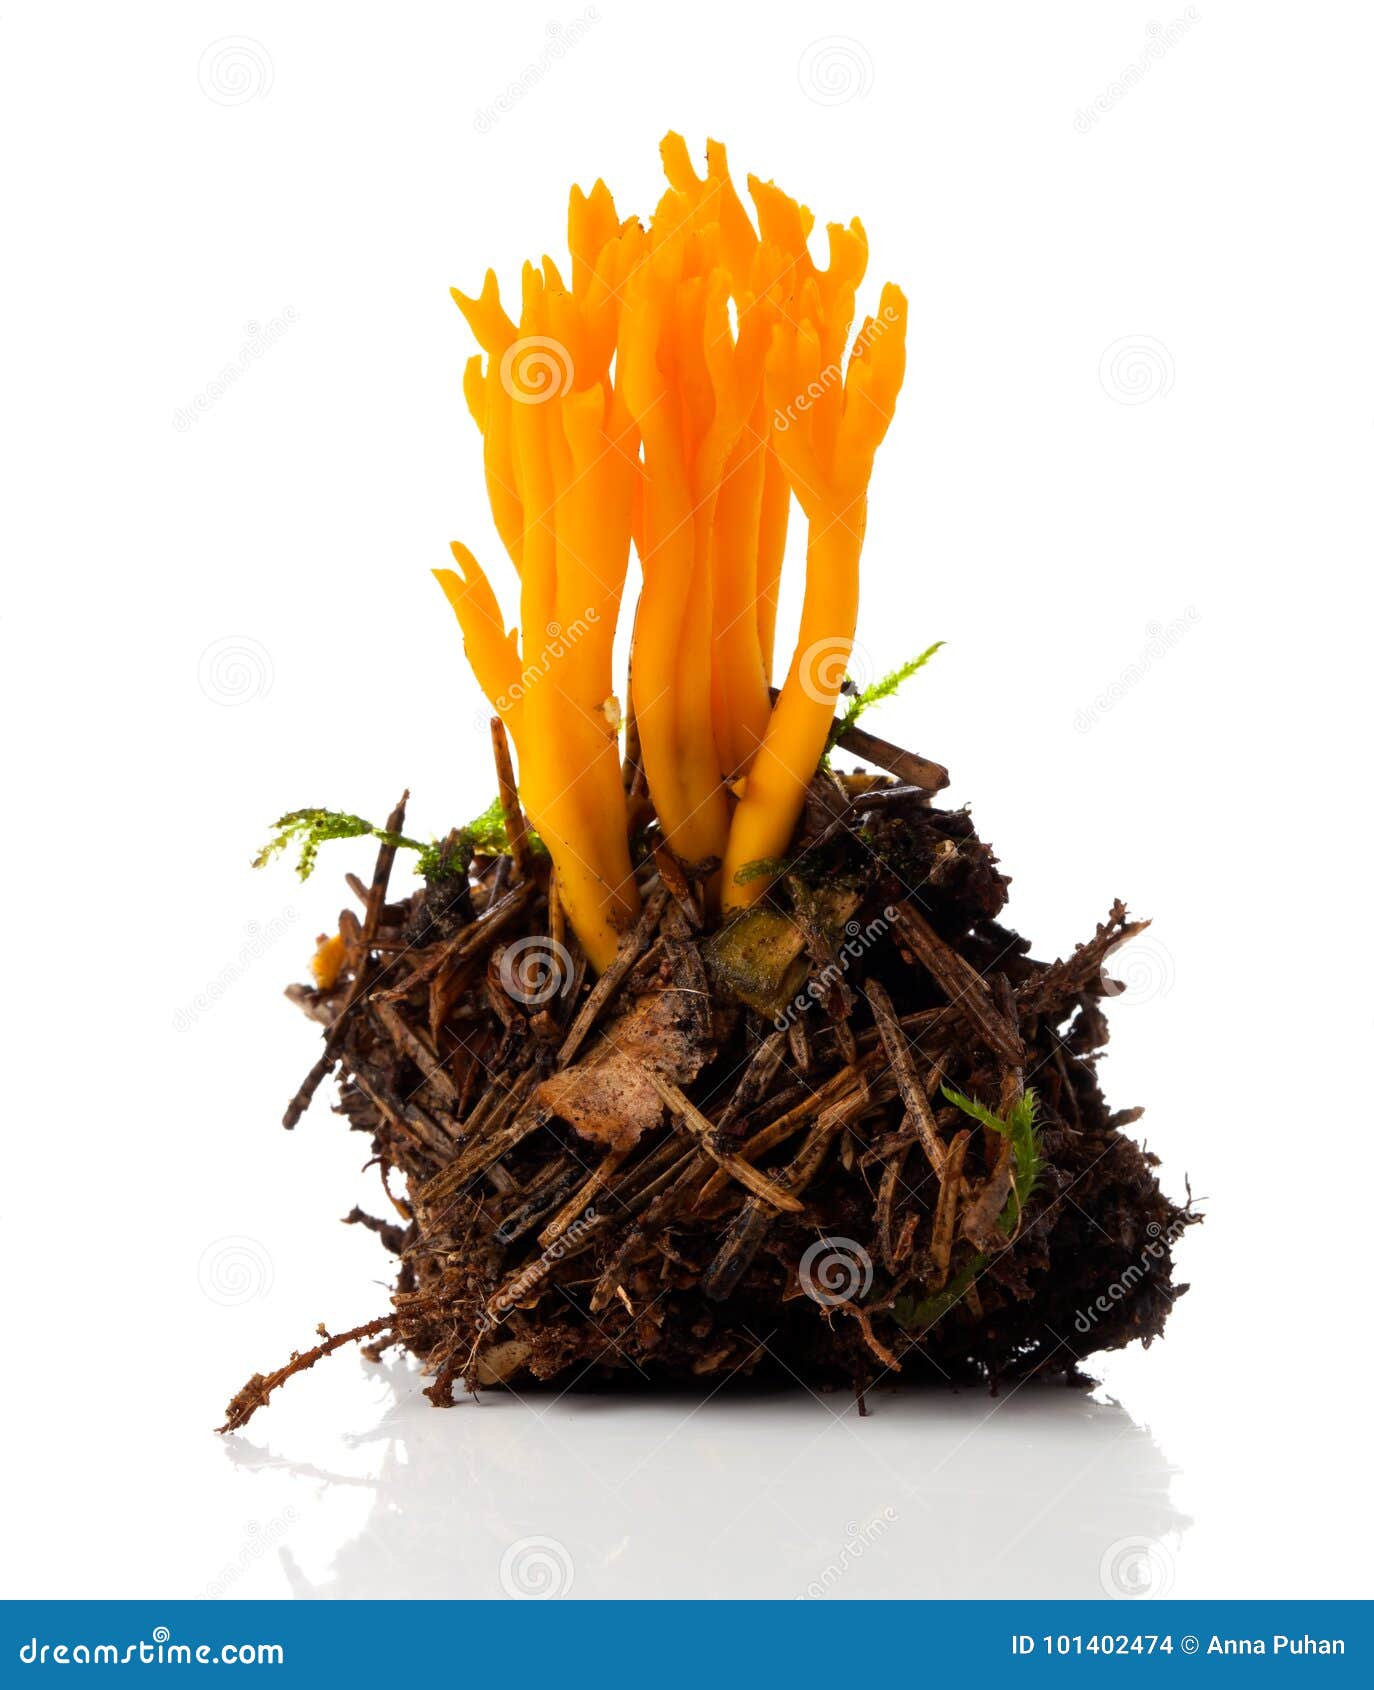 calocera viscosa, commonly known as the yellow stagshorn